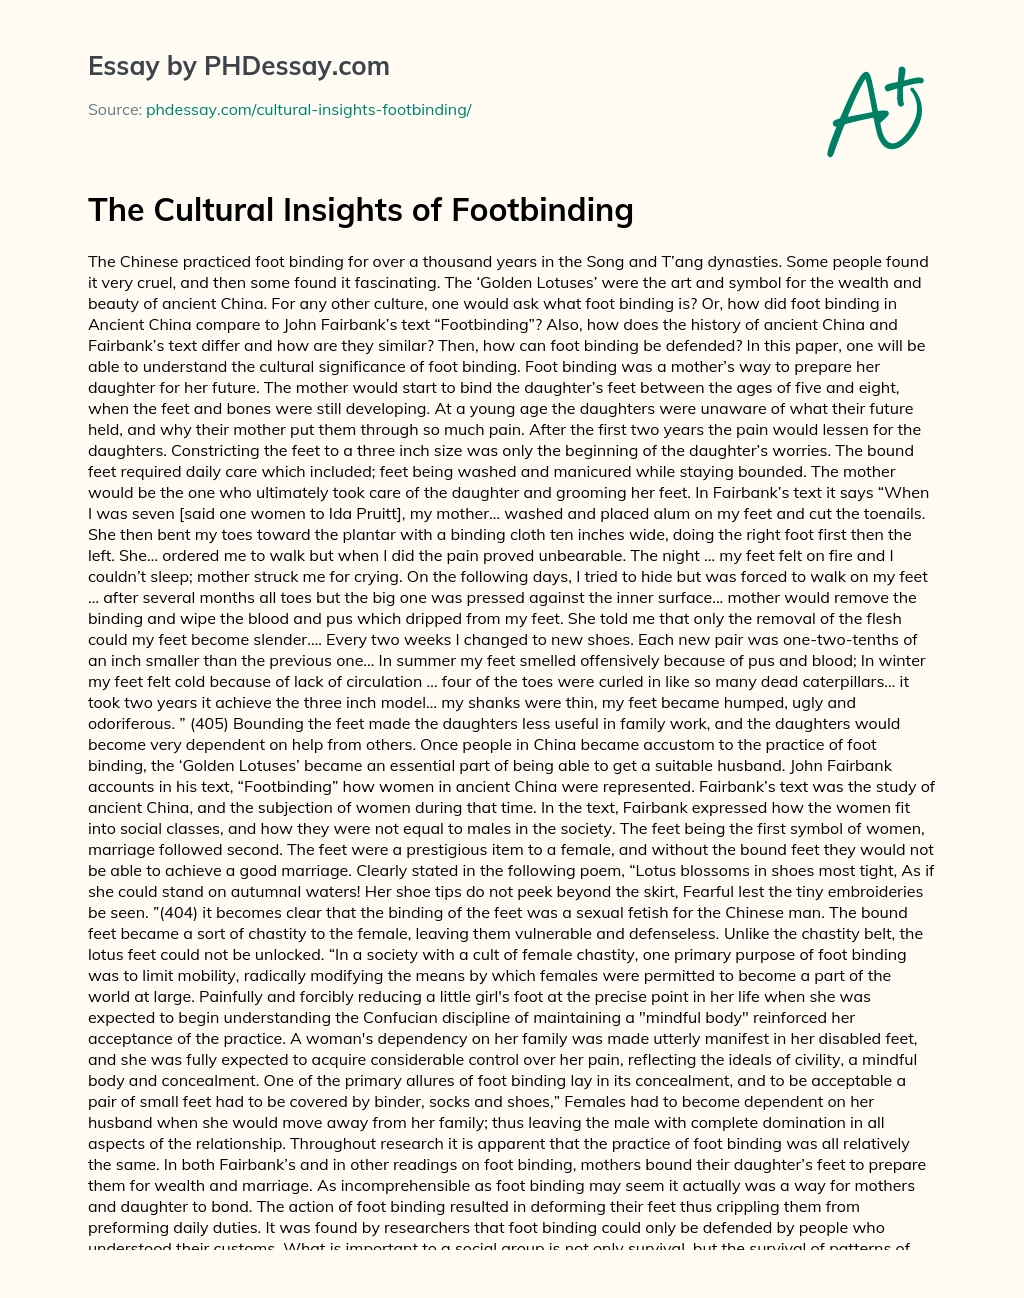 The Cultural Insights of Footbinding essay